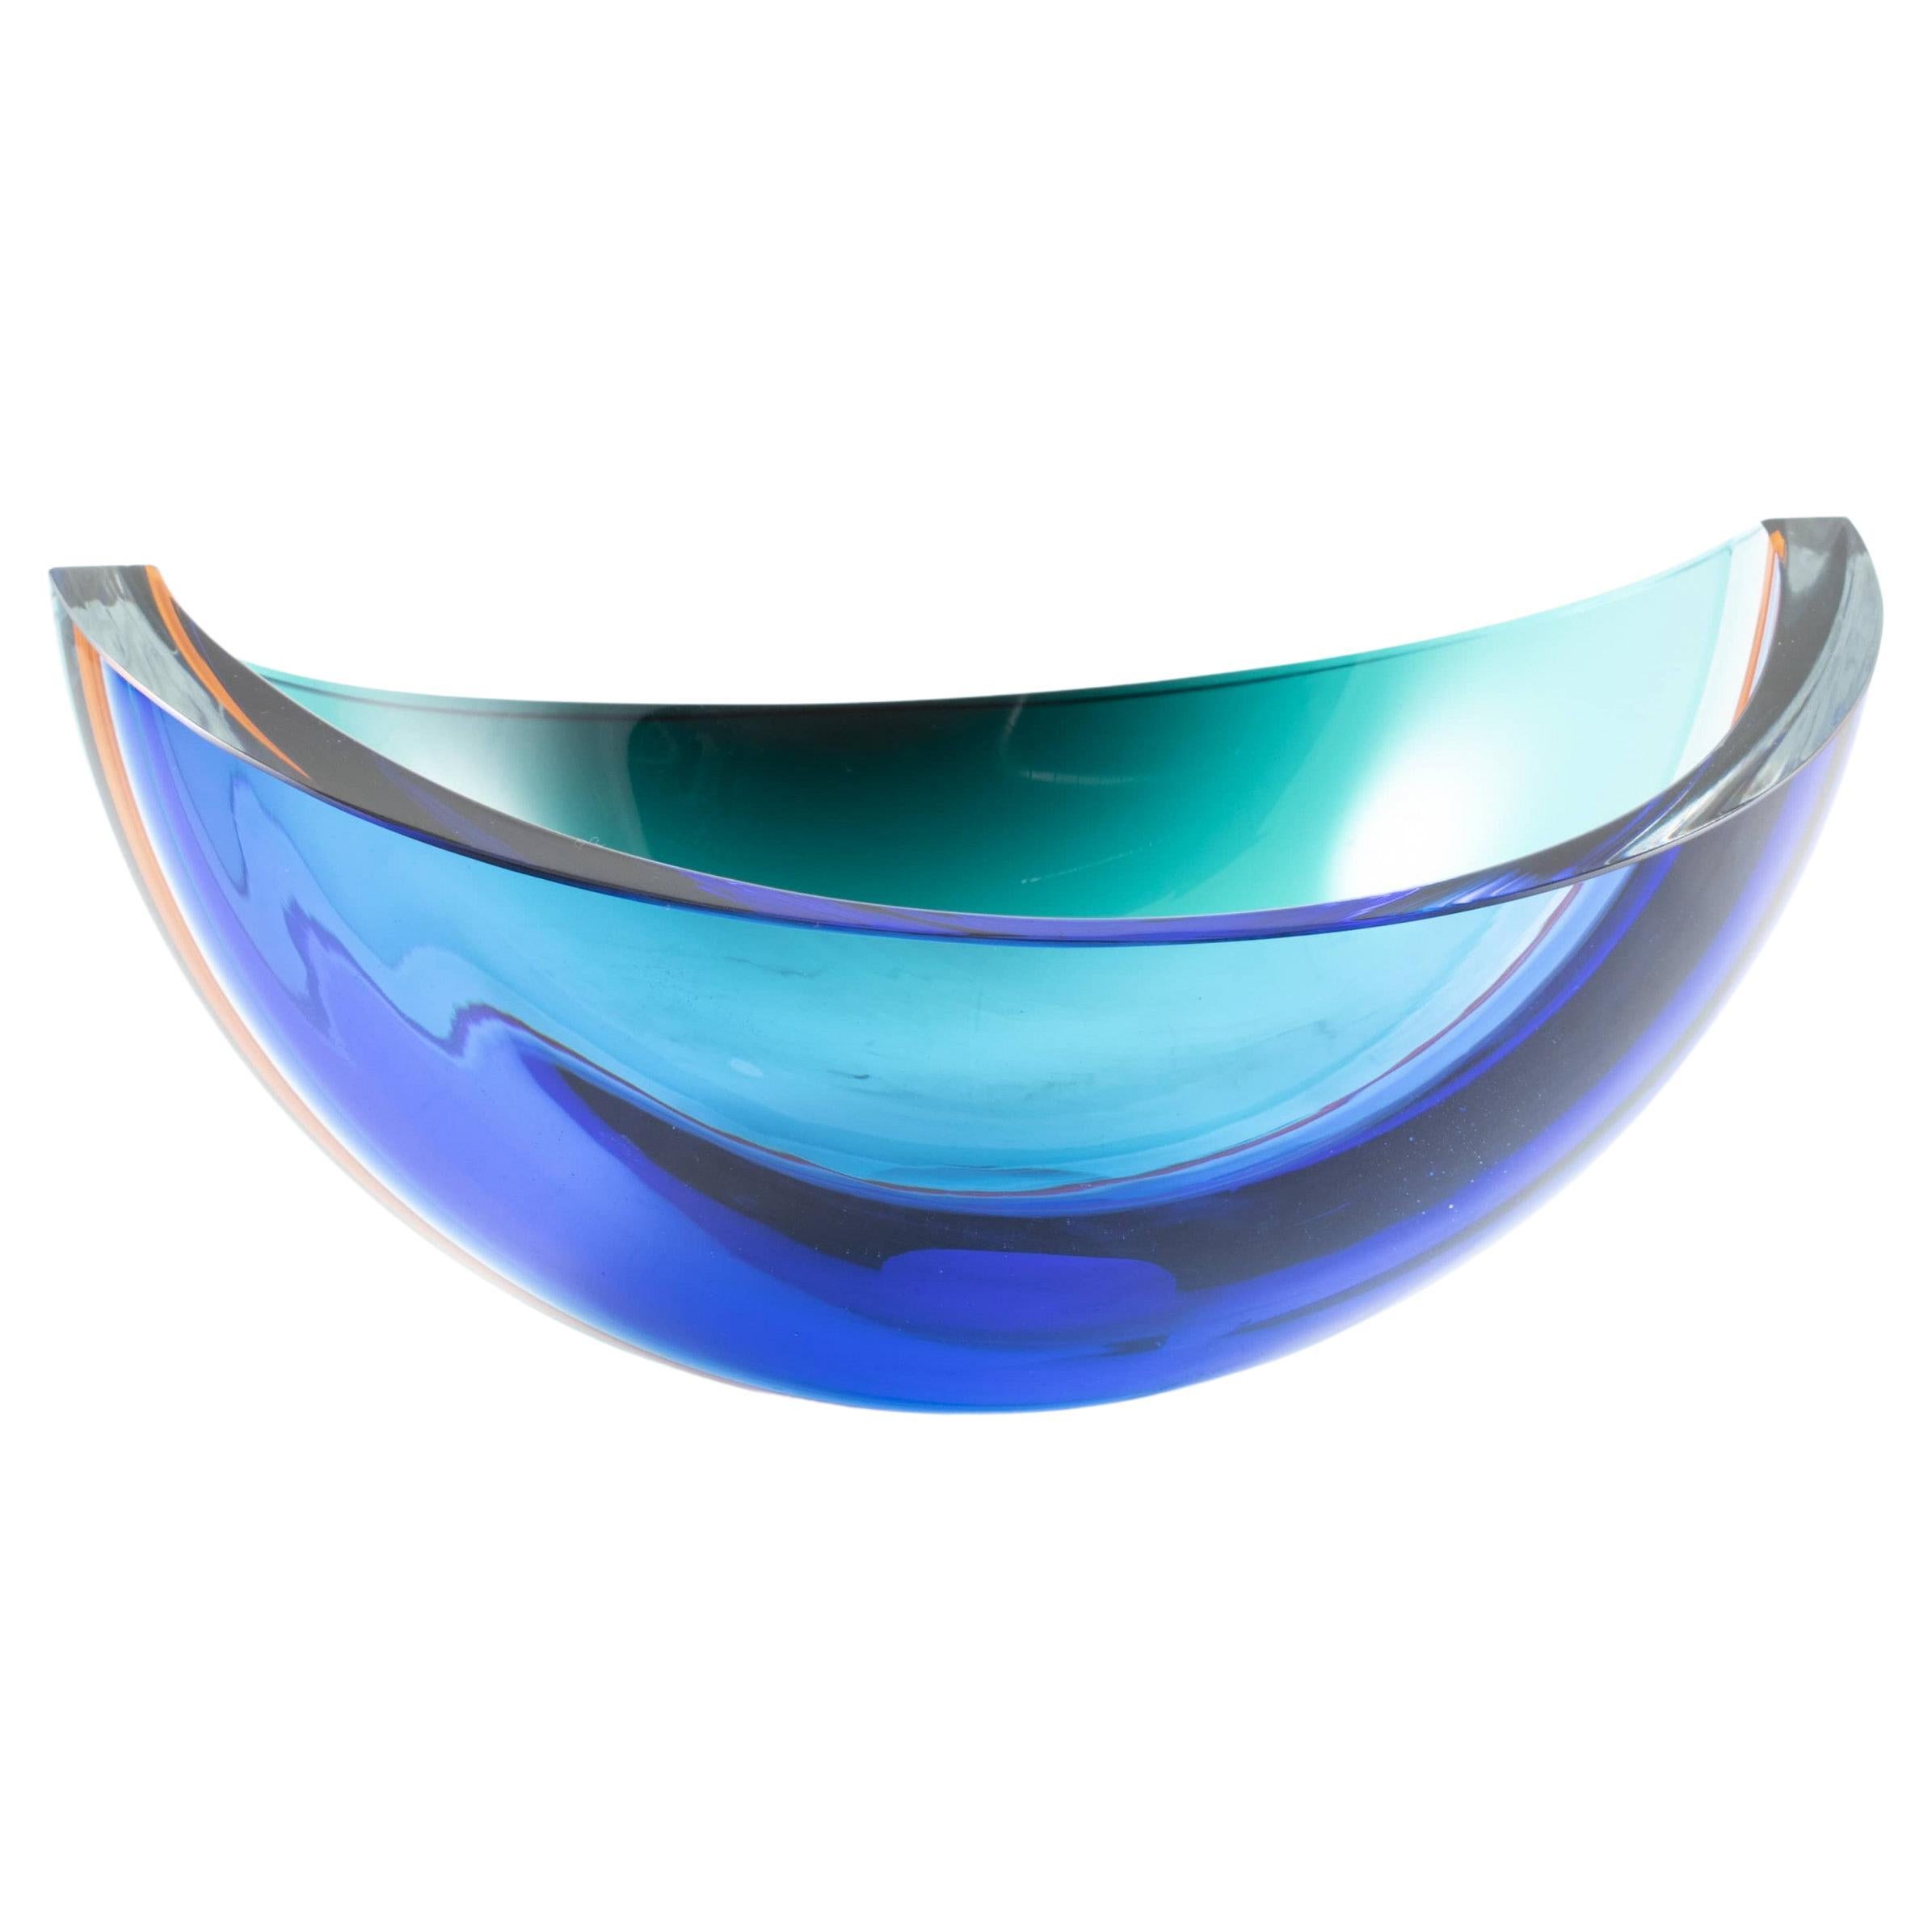 Sidse Werner 1931-1989.
Rare and one-of-a-kind glass bowl. One half is blue the other is green, divided in the middle by an orange line.
Holmegaard approx. 1970.
Sidse Werner started working with the design of furniture, textiles, lamps and glass